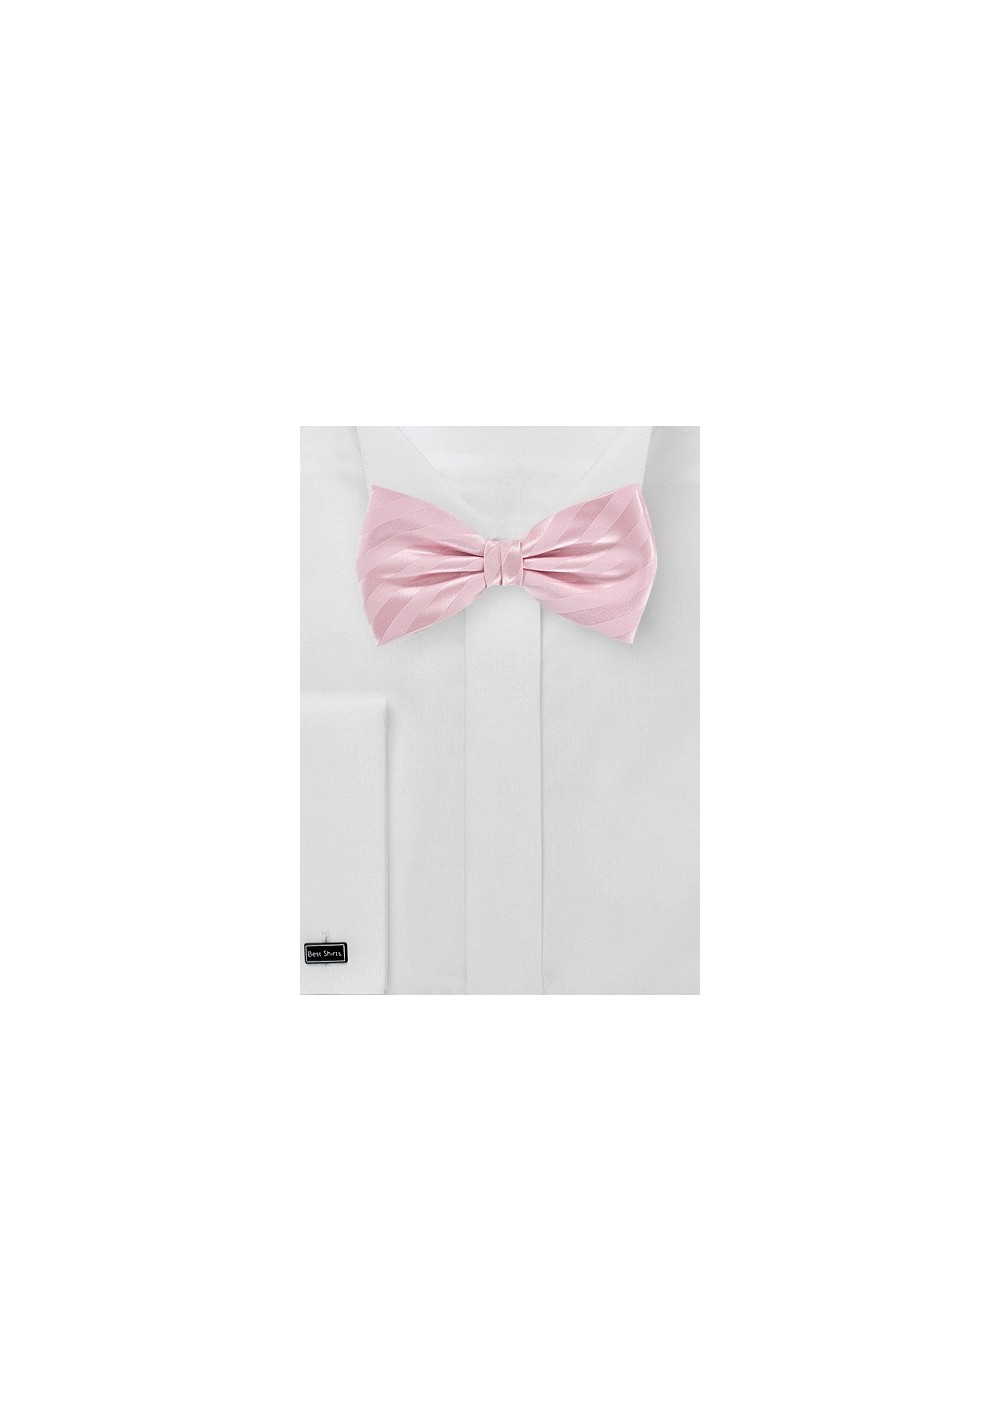 Mens Bow Tie in Cotton Candy Pink